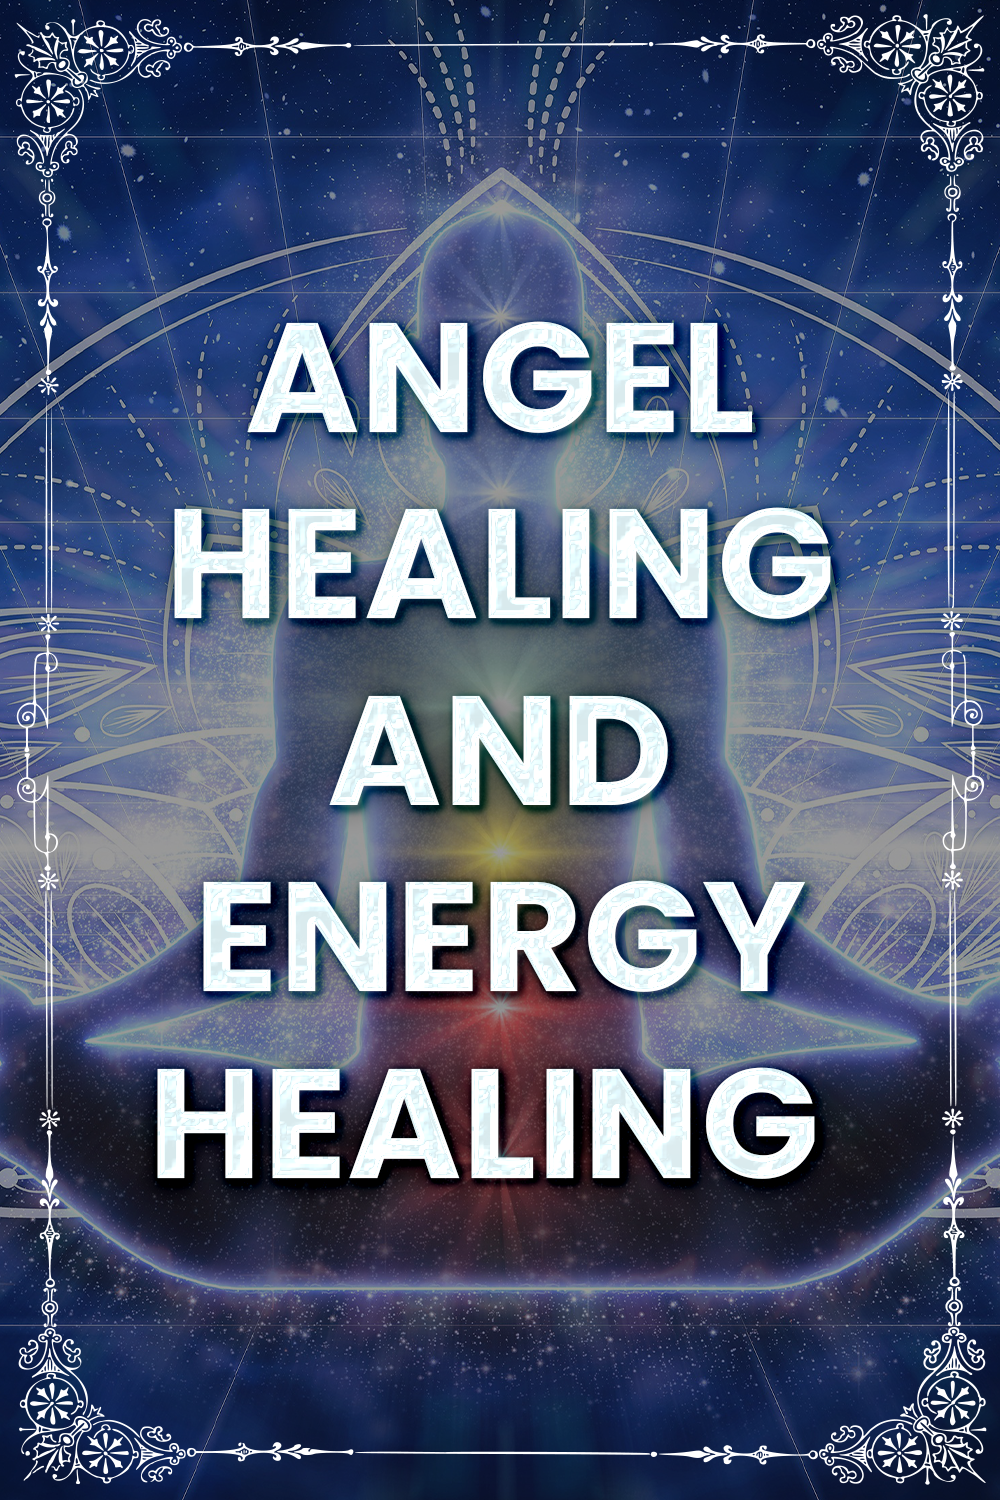 Who are The Angels Of Healing?